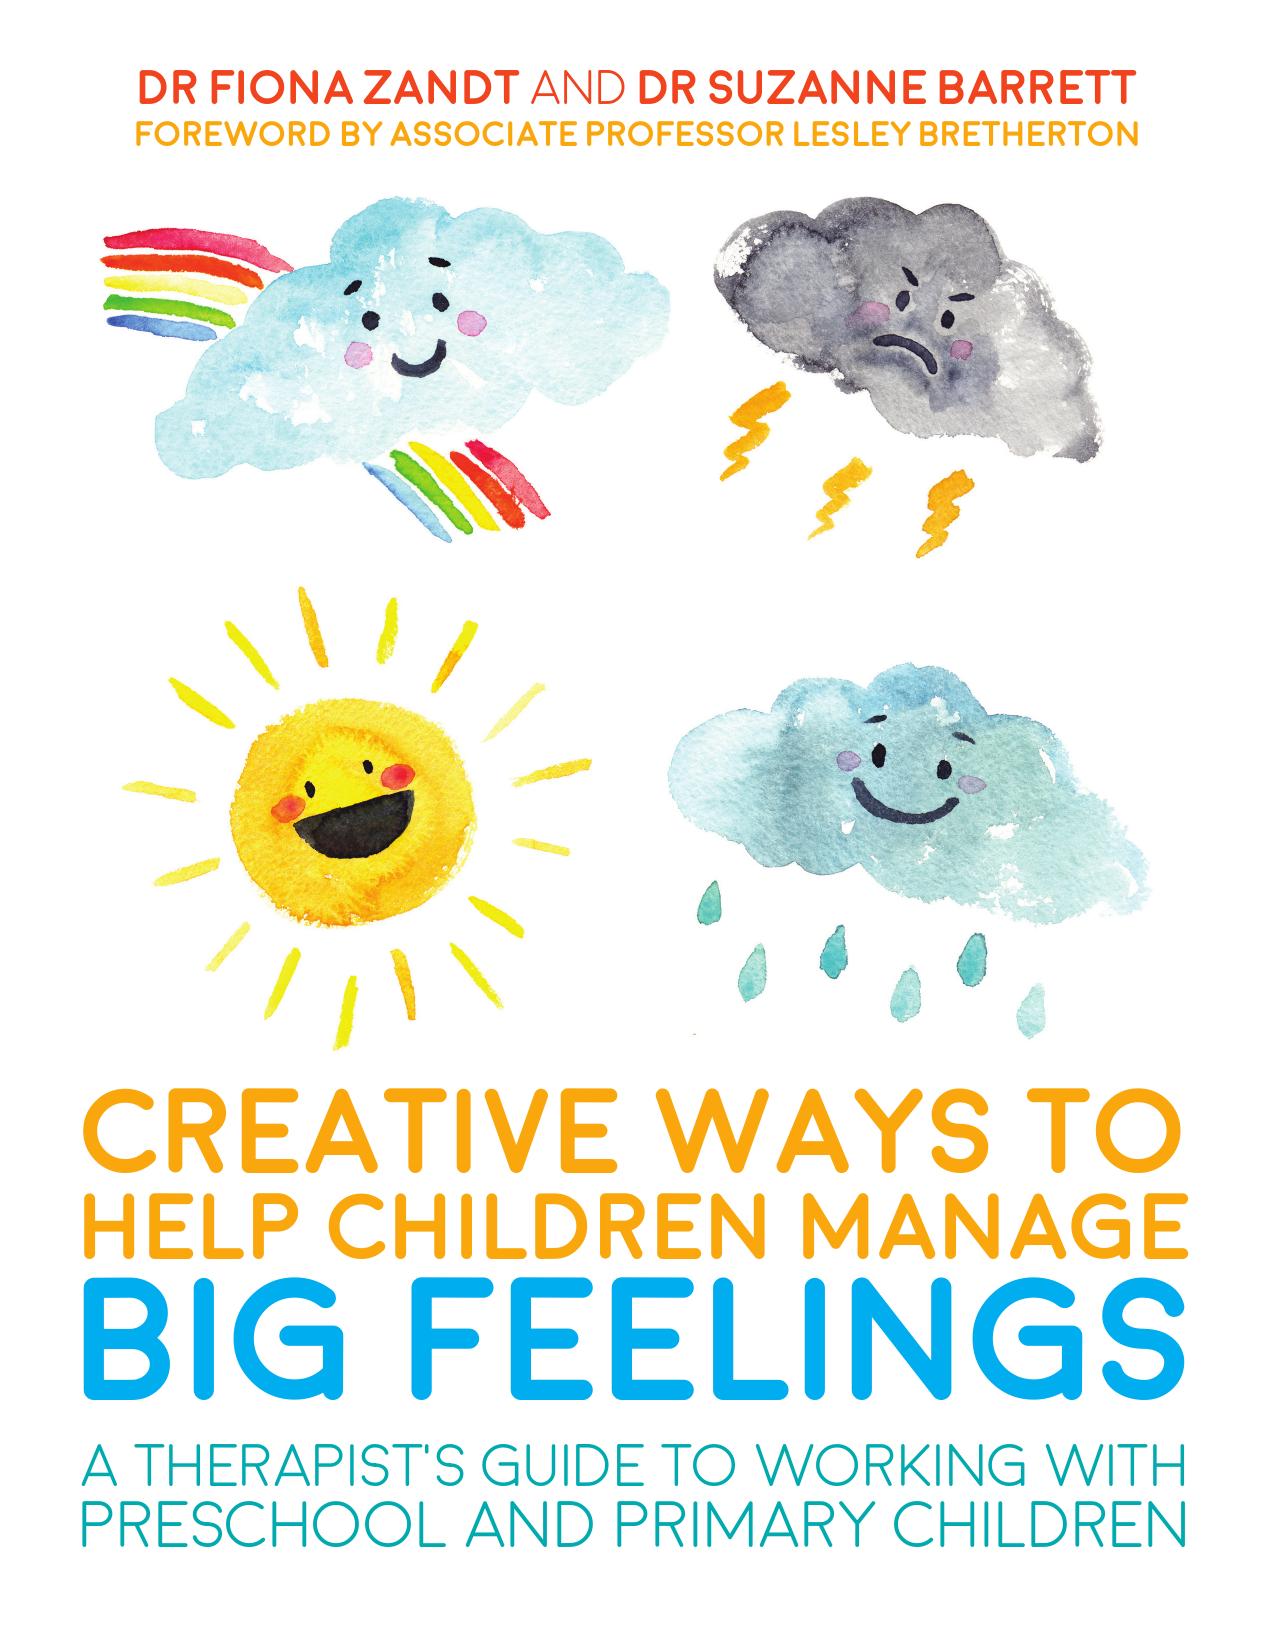 Creative Ways to Help Children Manage BIG Feelings A Therapist’s Guide 2017